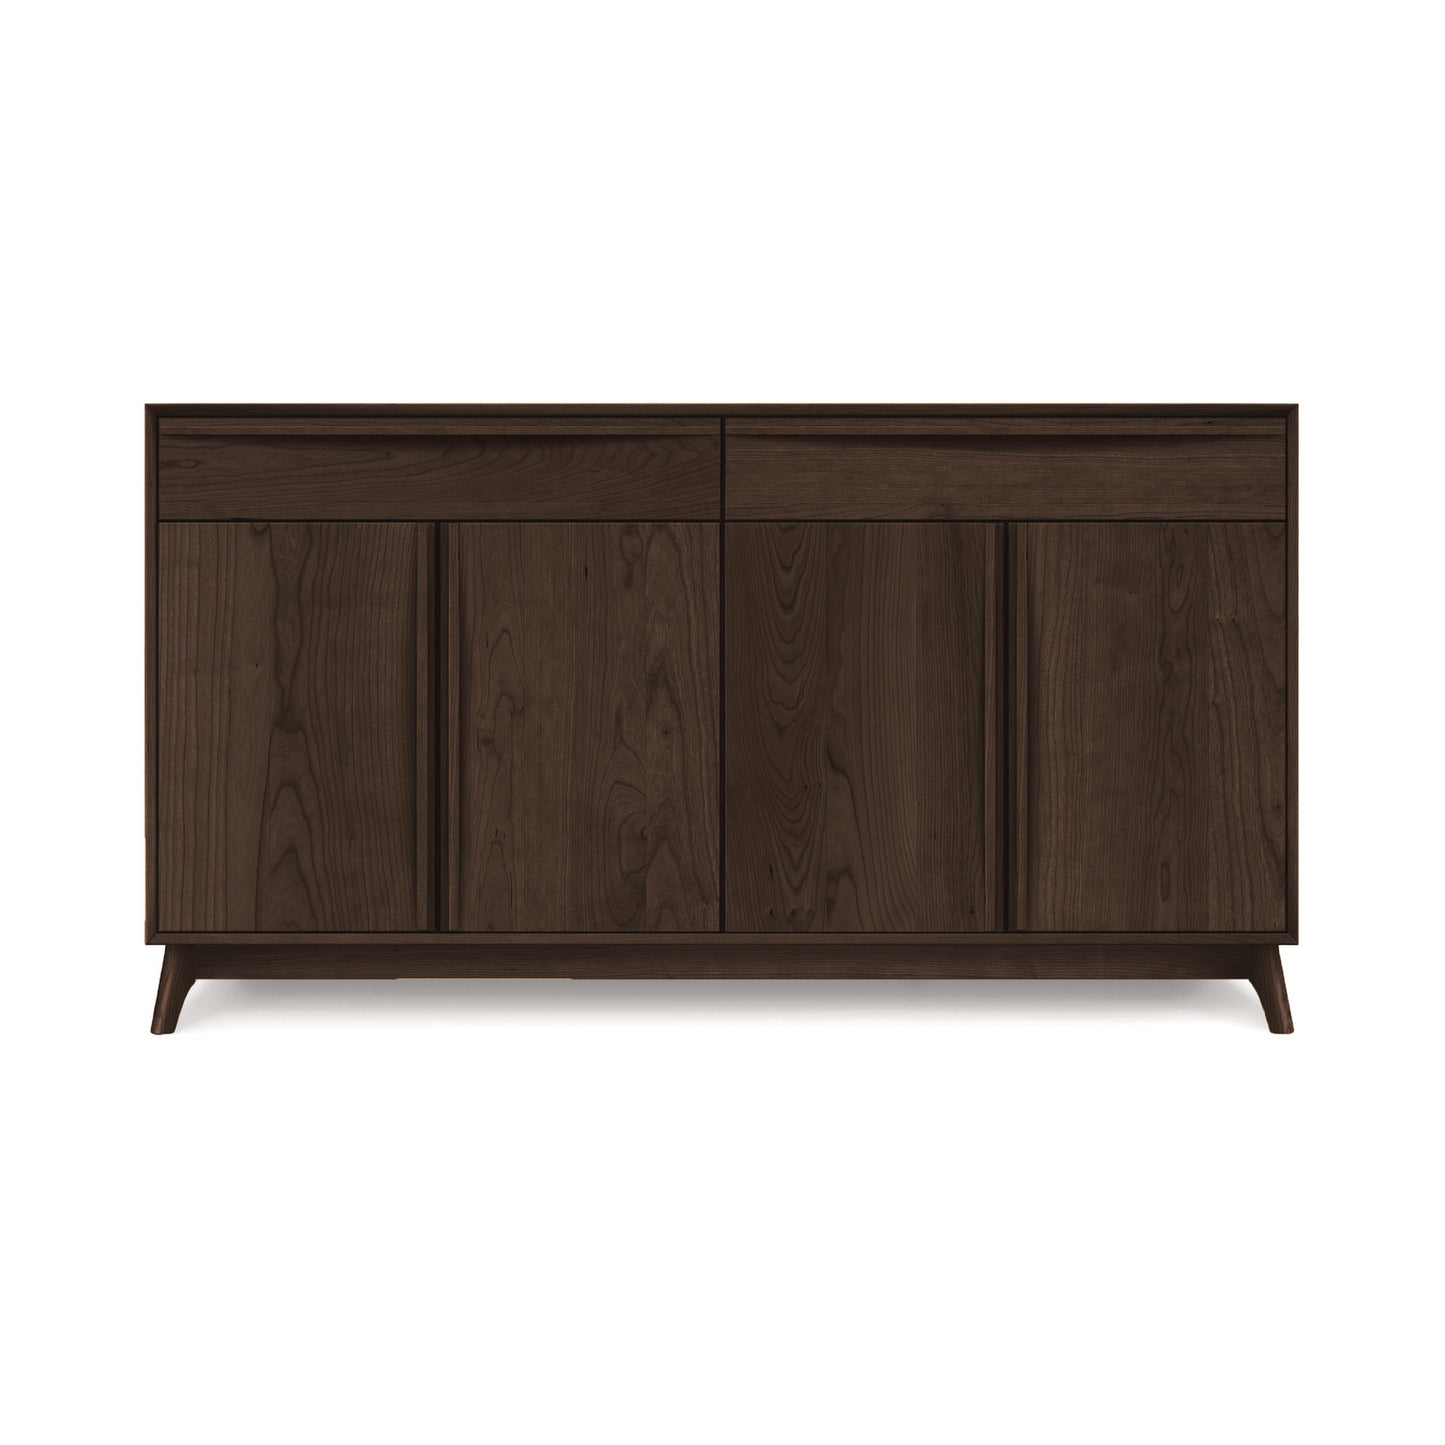 A handcrafted in Vermont Copeland Furniture Catalina 2-Drawers, 4-Door Buffet, a solid wood dining furniture piece with two compartments and a dark finish, standing on angled legs.